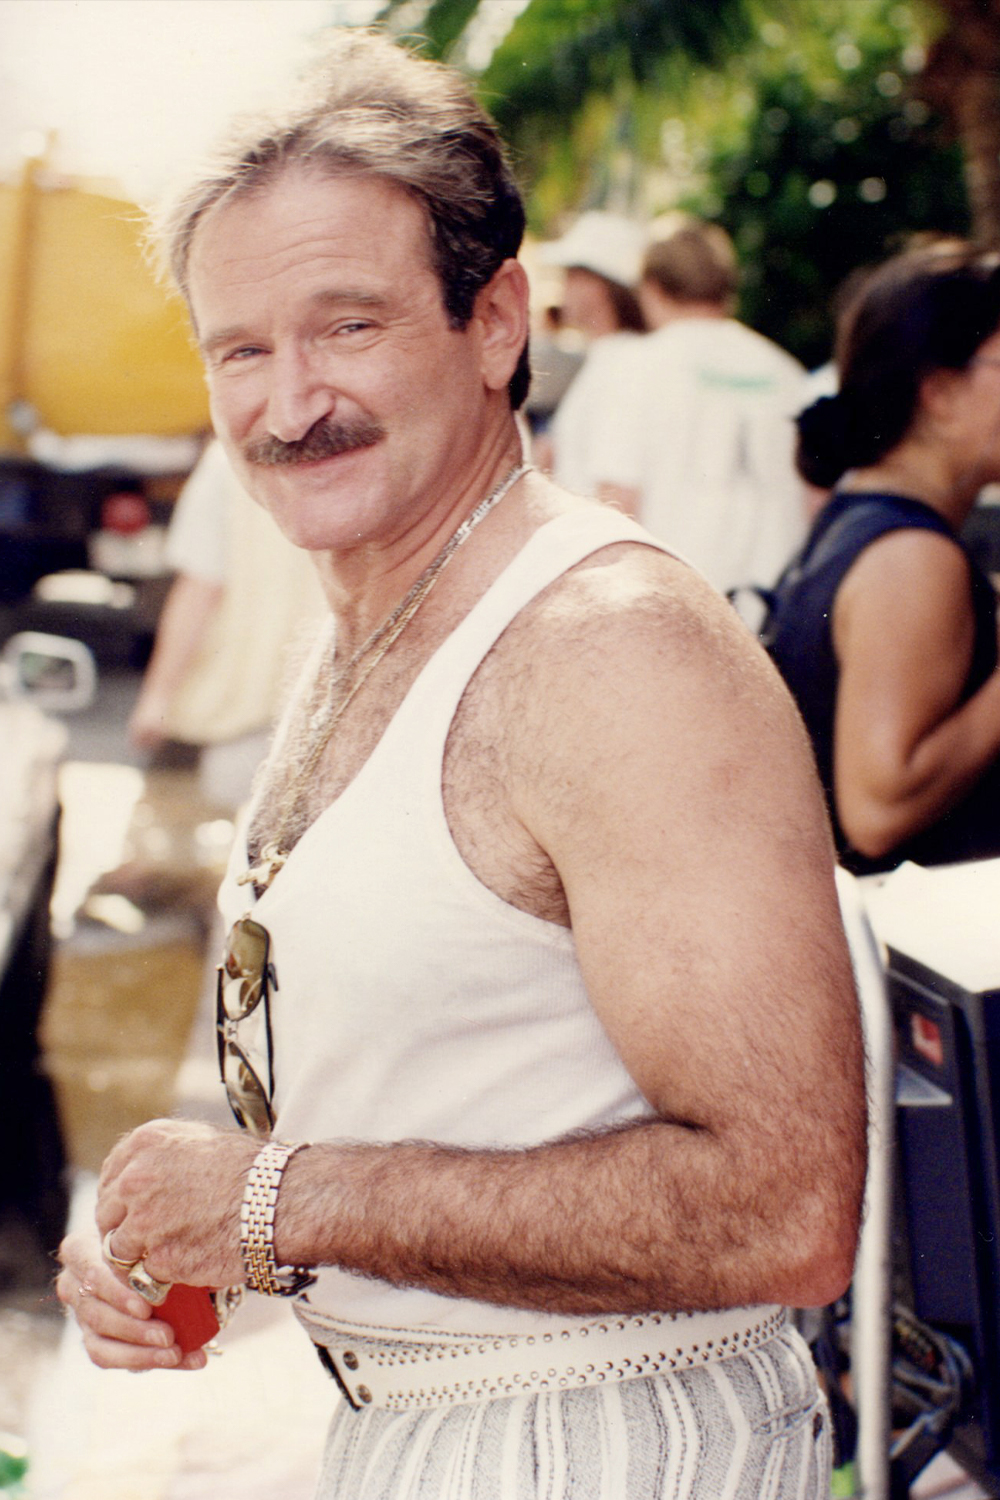 Robin Williams on the set of "The Birdcage" in 1995 in Miami Beach